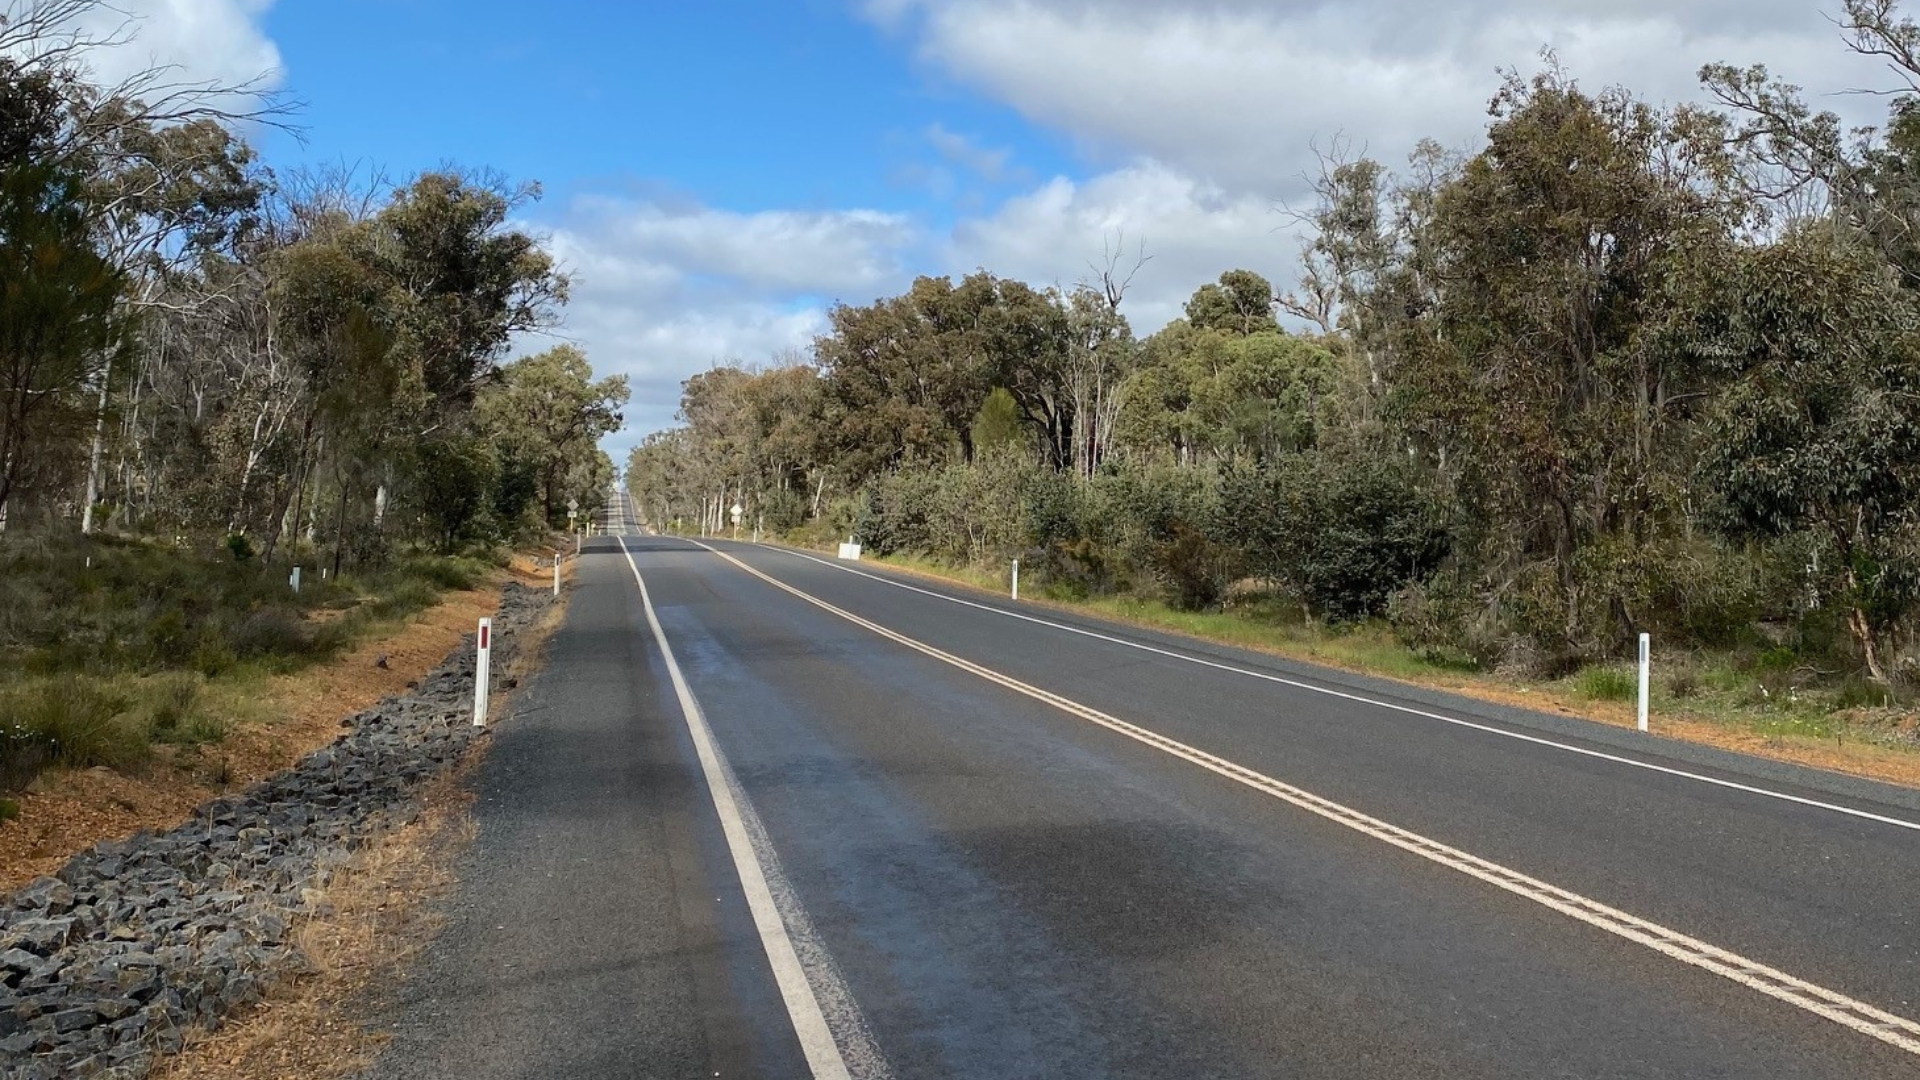 Advocacy for upgrades to Pinjarra Williams Road